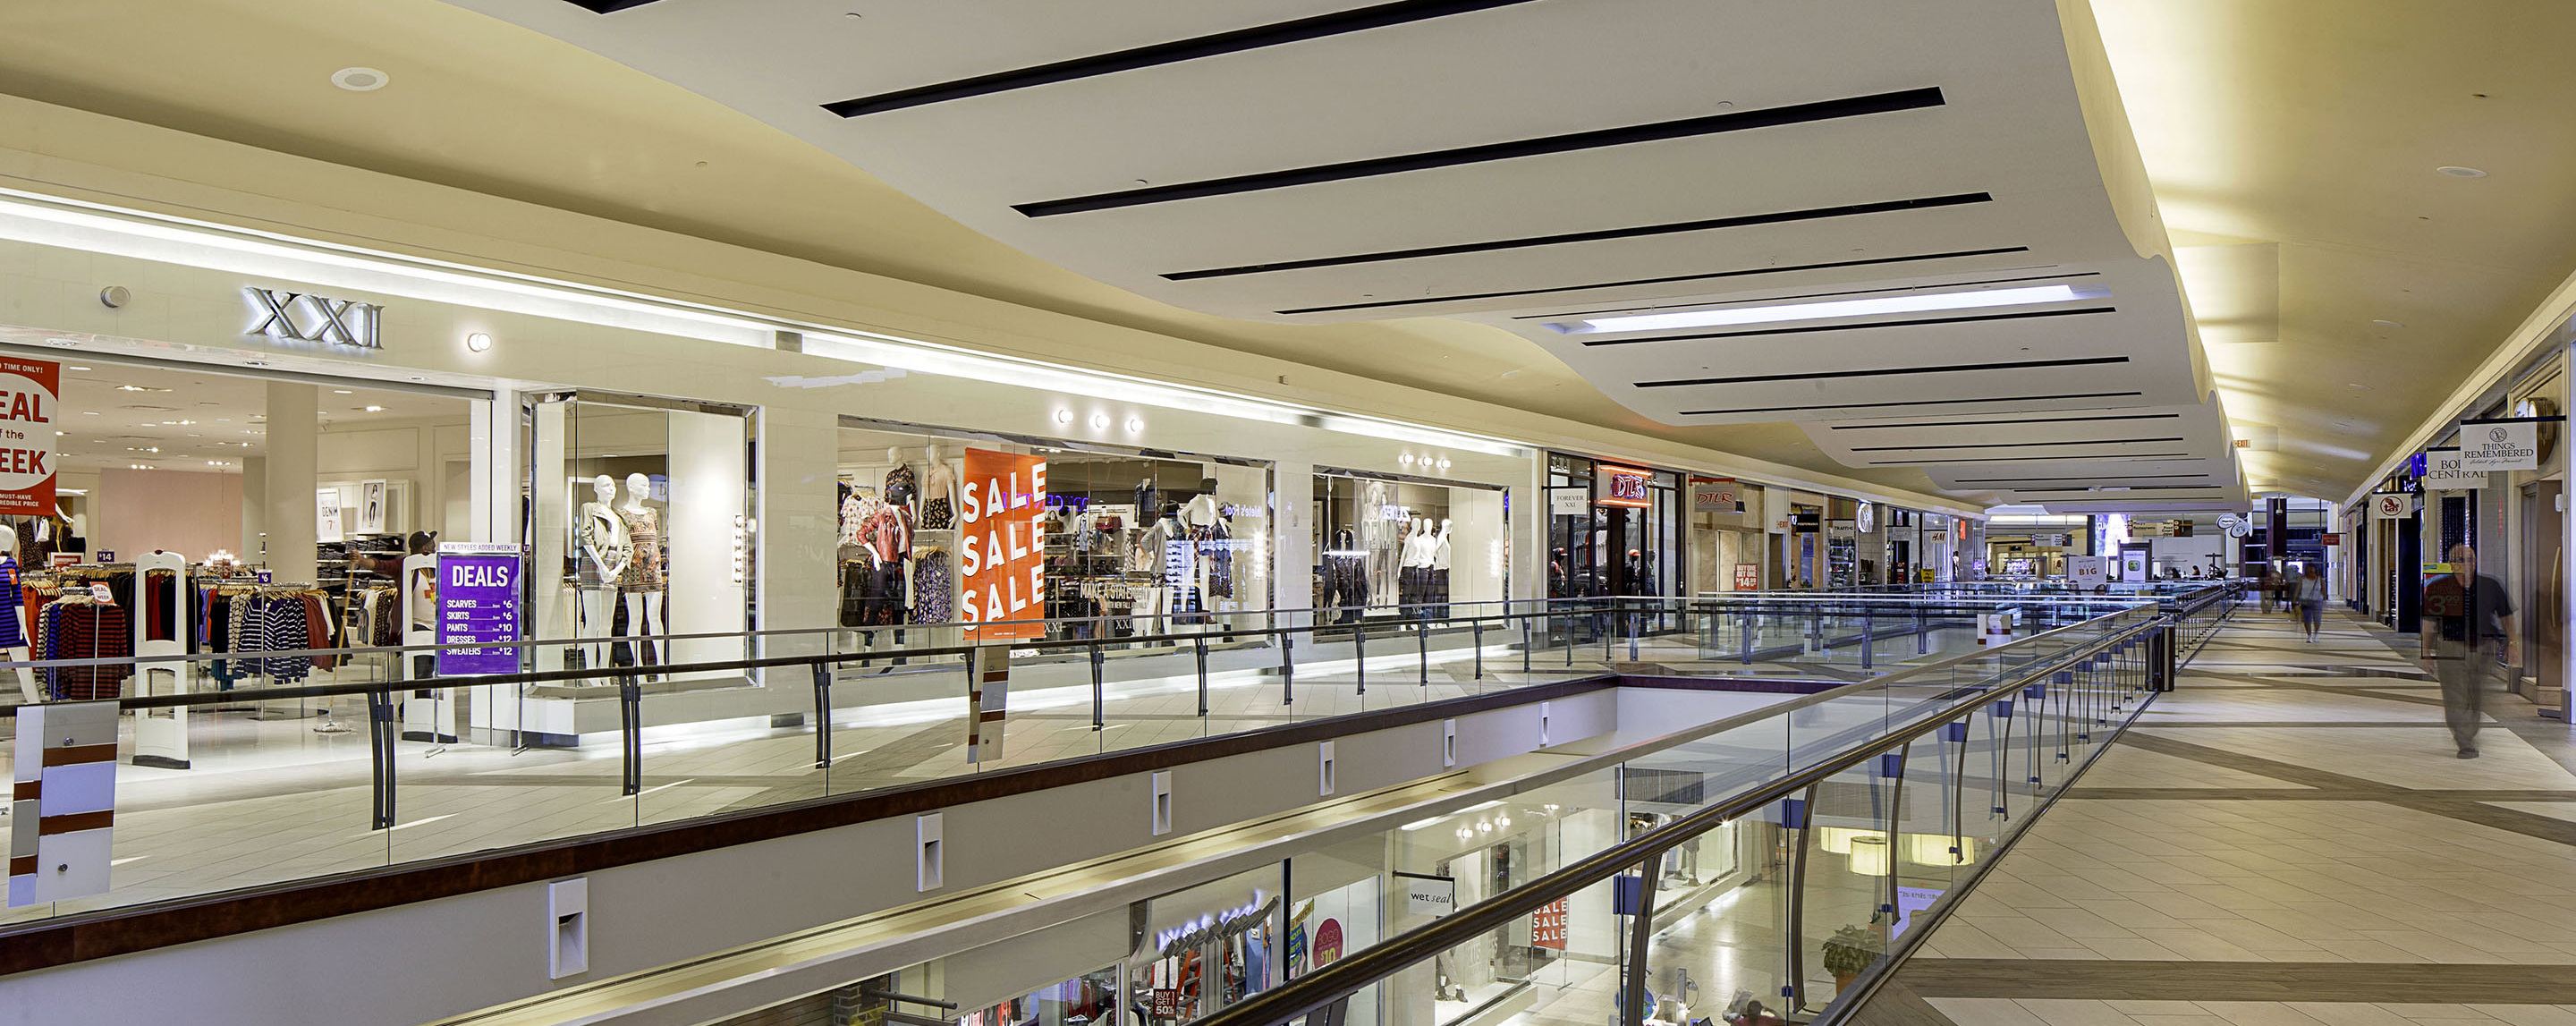 Clothing stores line a long corridor in a brightly lit indoor multilevel shopping center.